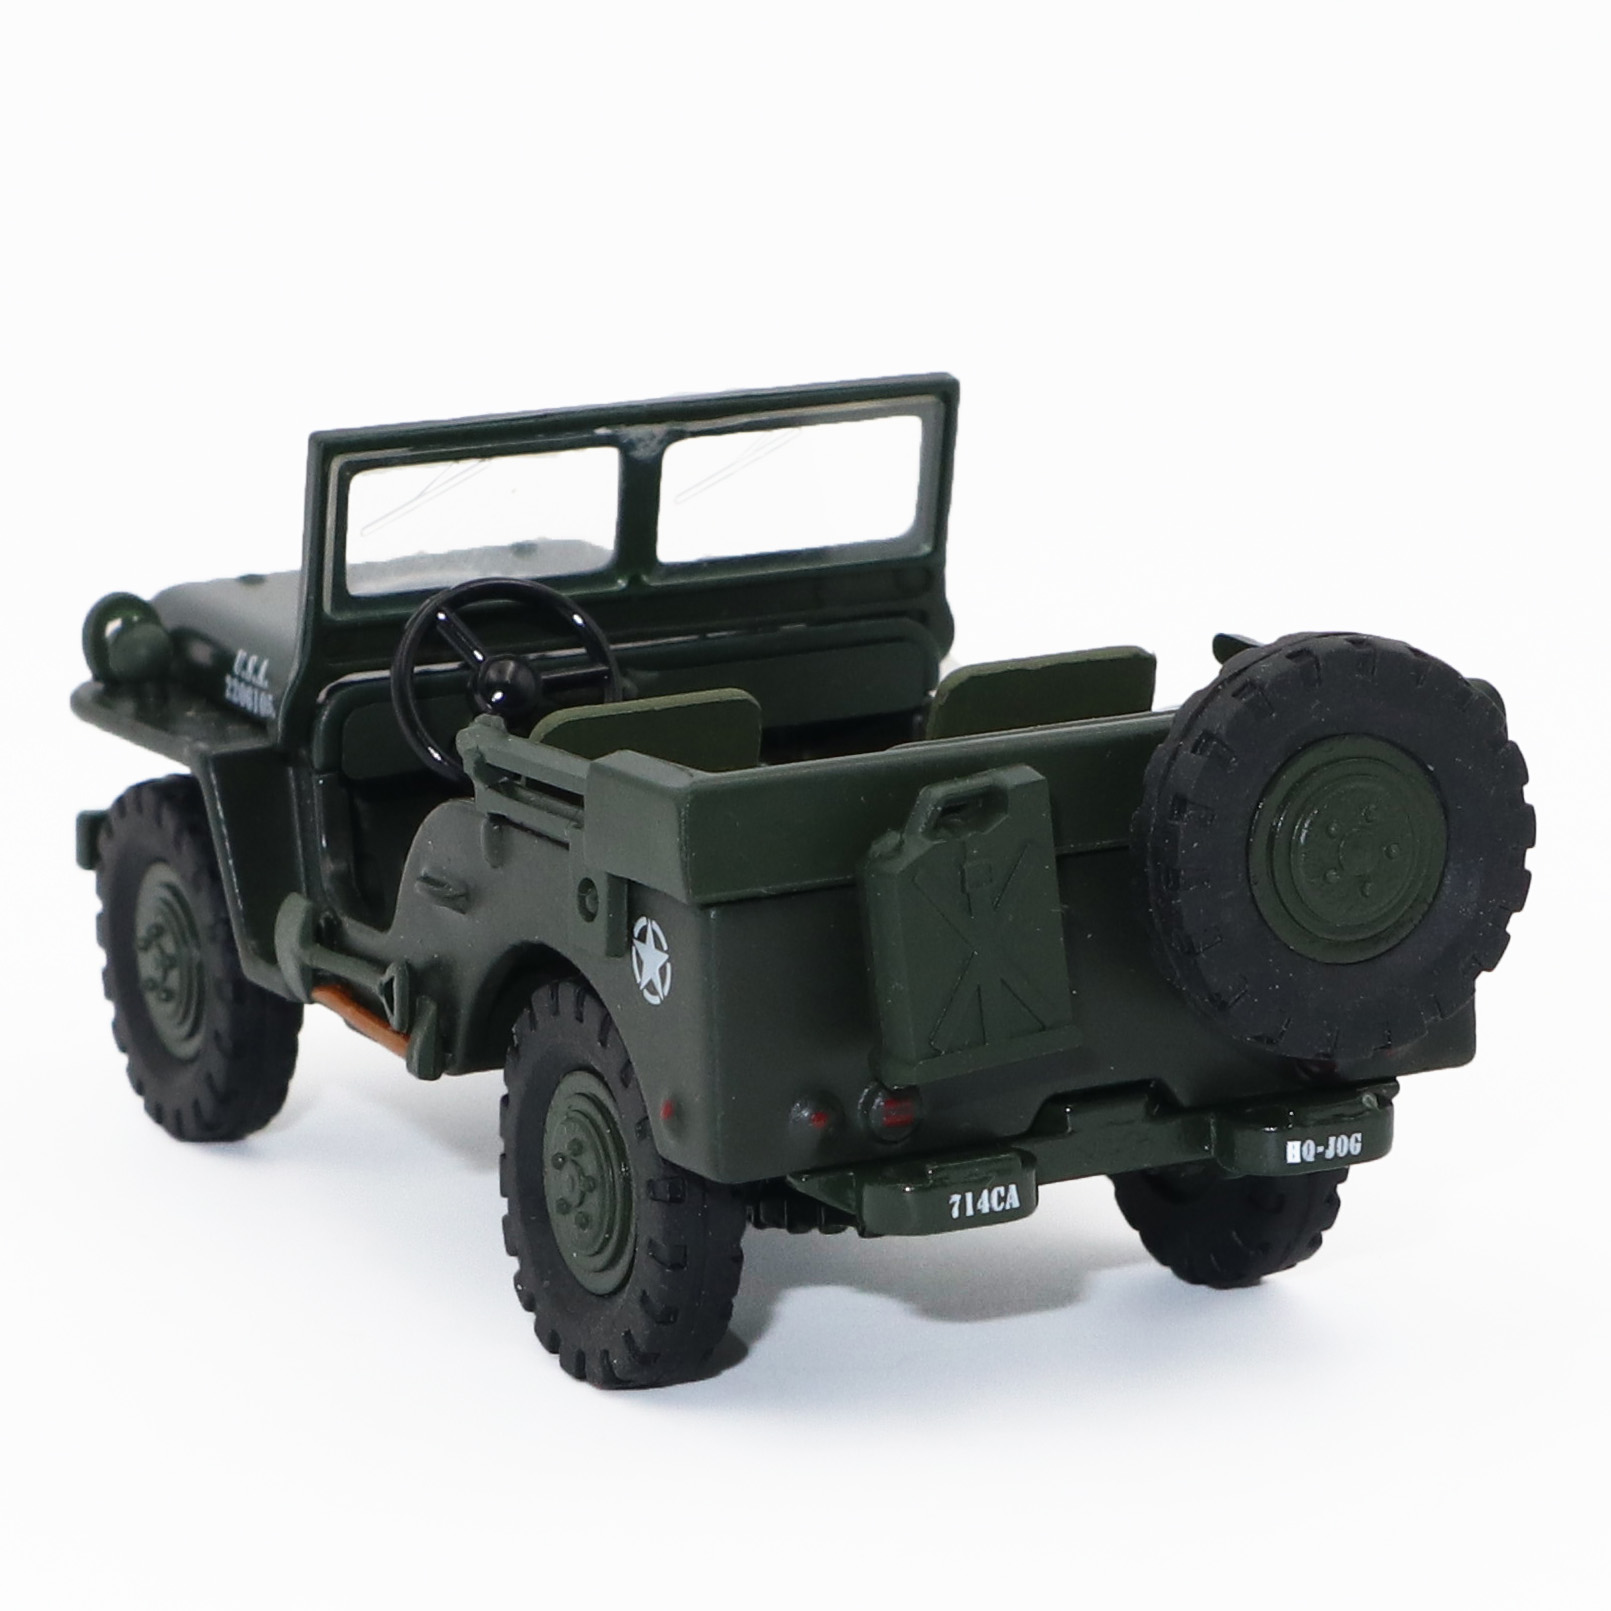 1:43 diecast metal military car model decoration diecast toy vehicles